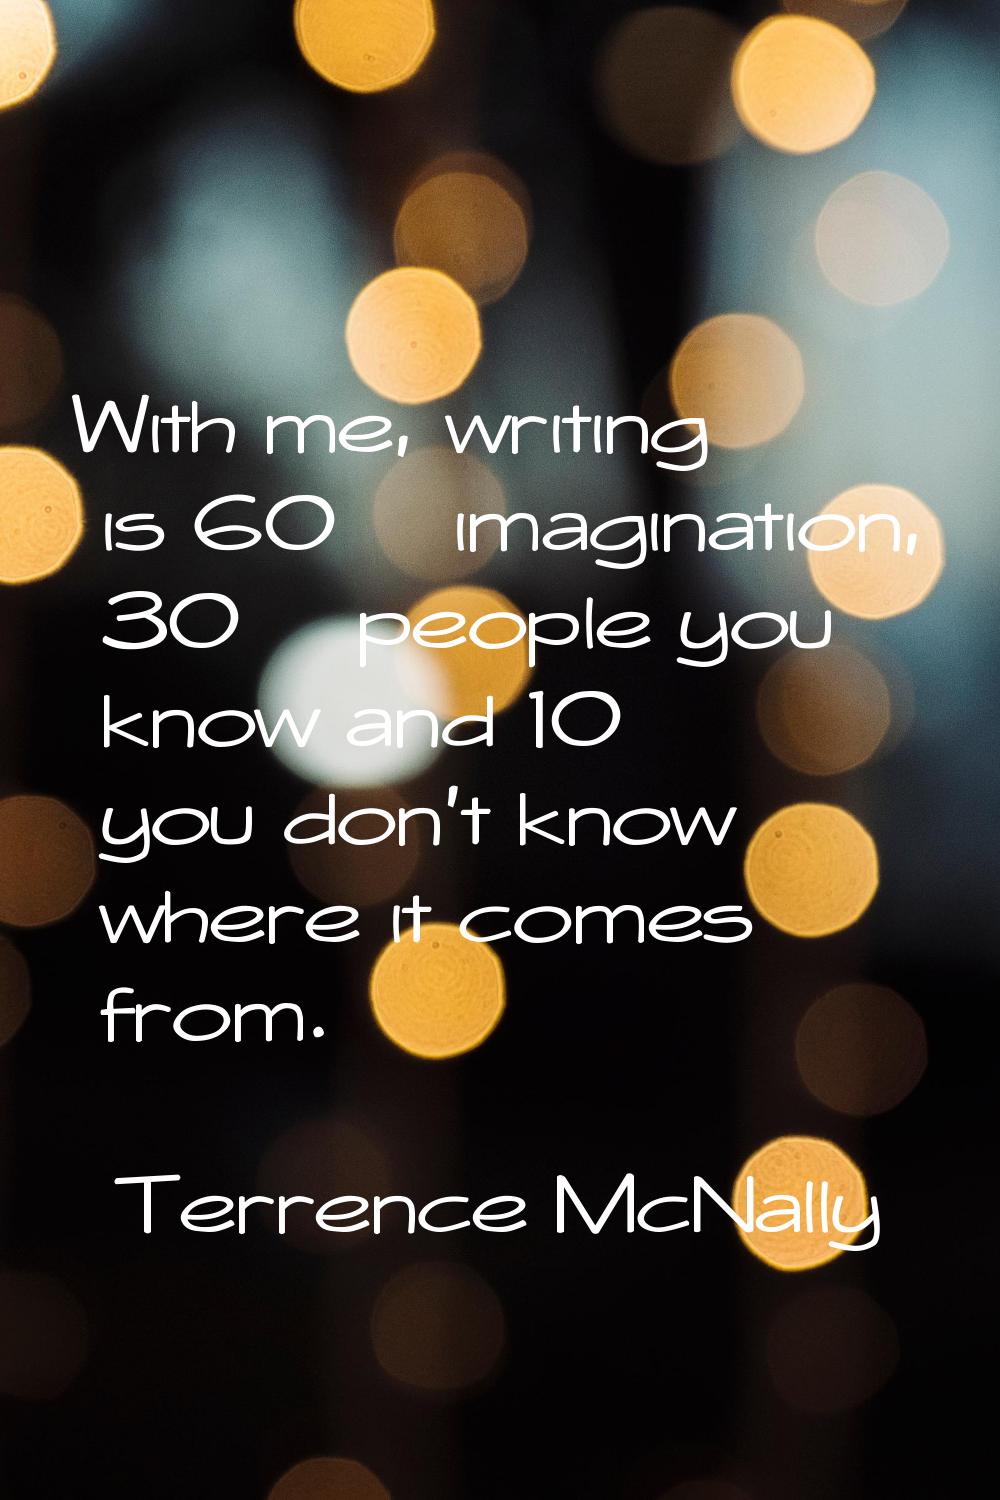 With me, writing is 60% imagination, 30% people you know and 10% you don't know where it comes from